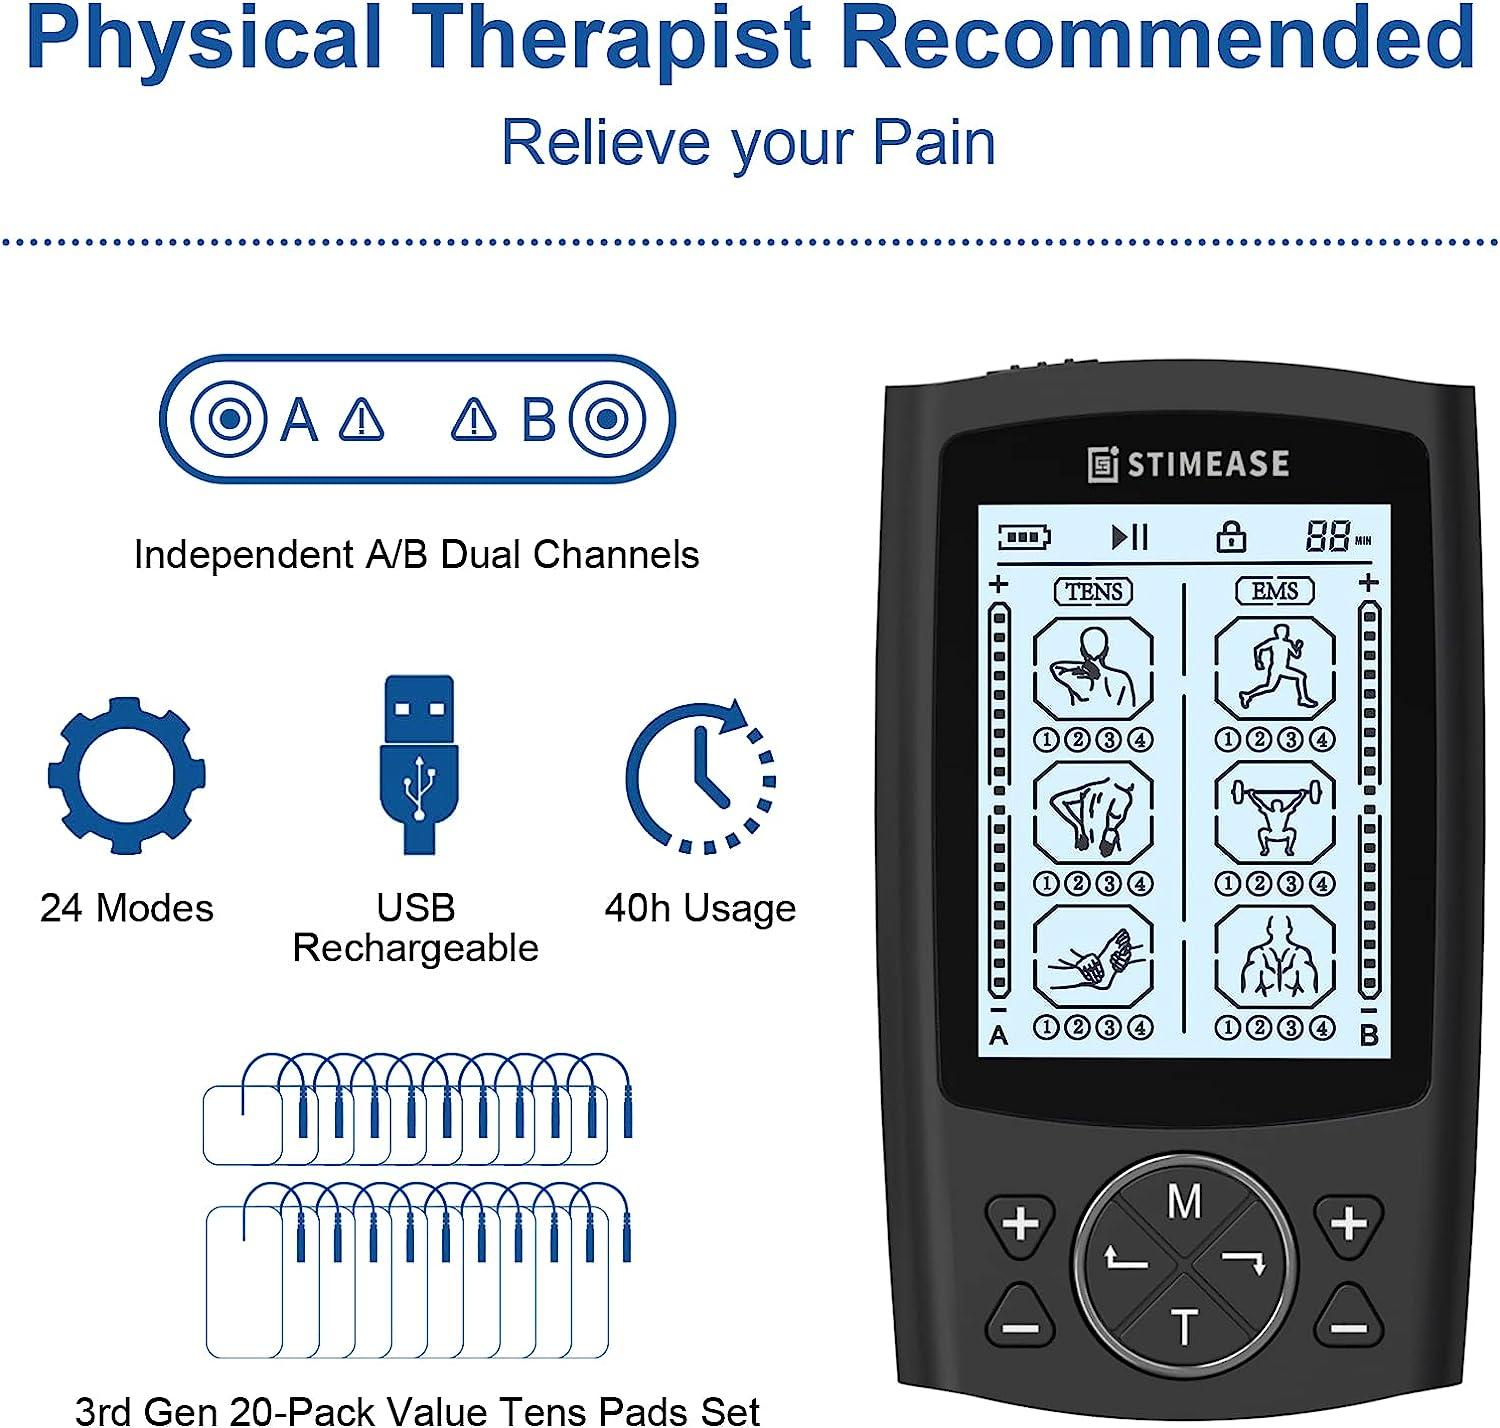 TENS Unit & EMS Muscle Stimulator, for Sciatica Pain Relief, Neck Pain,  Back Pain Relief. Portable Stim Machine for Muscle Recovery. Tens Machine |  12